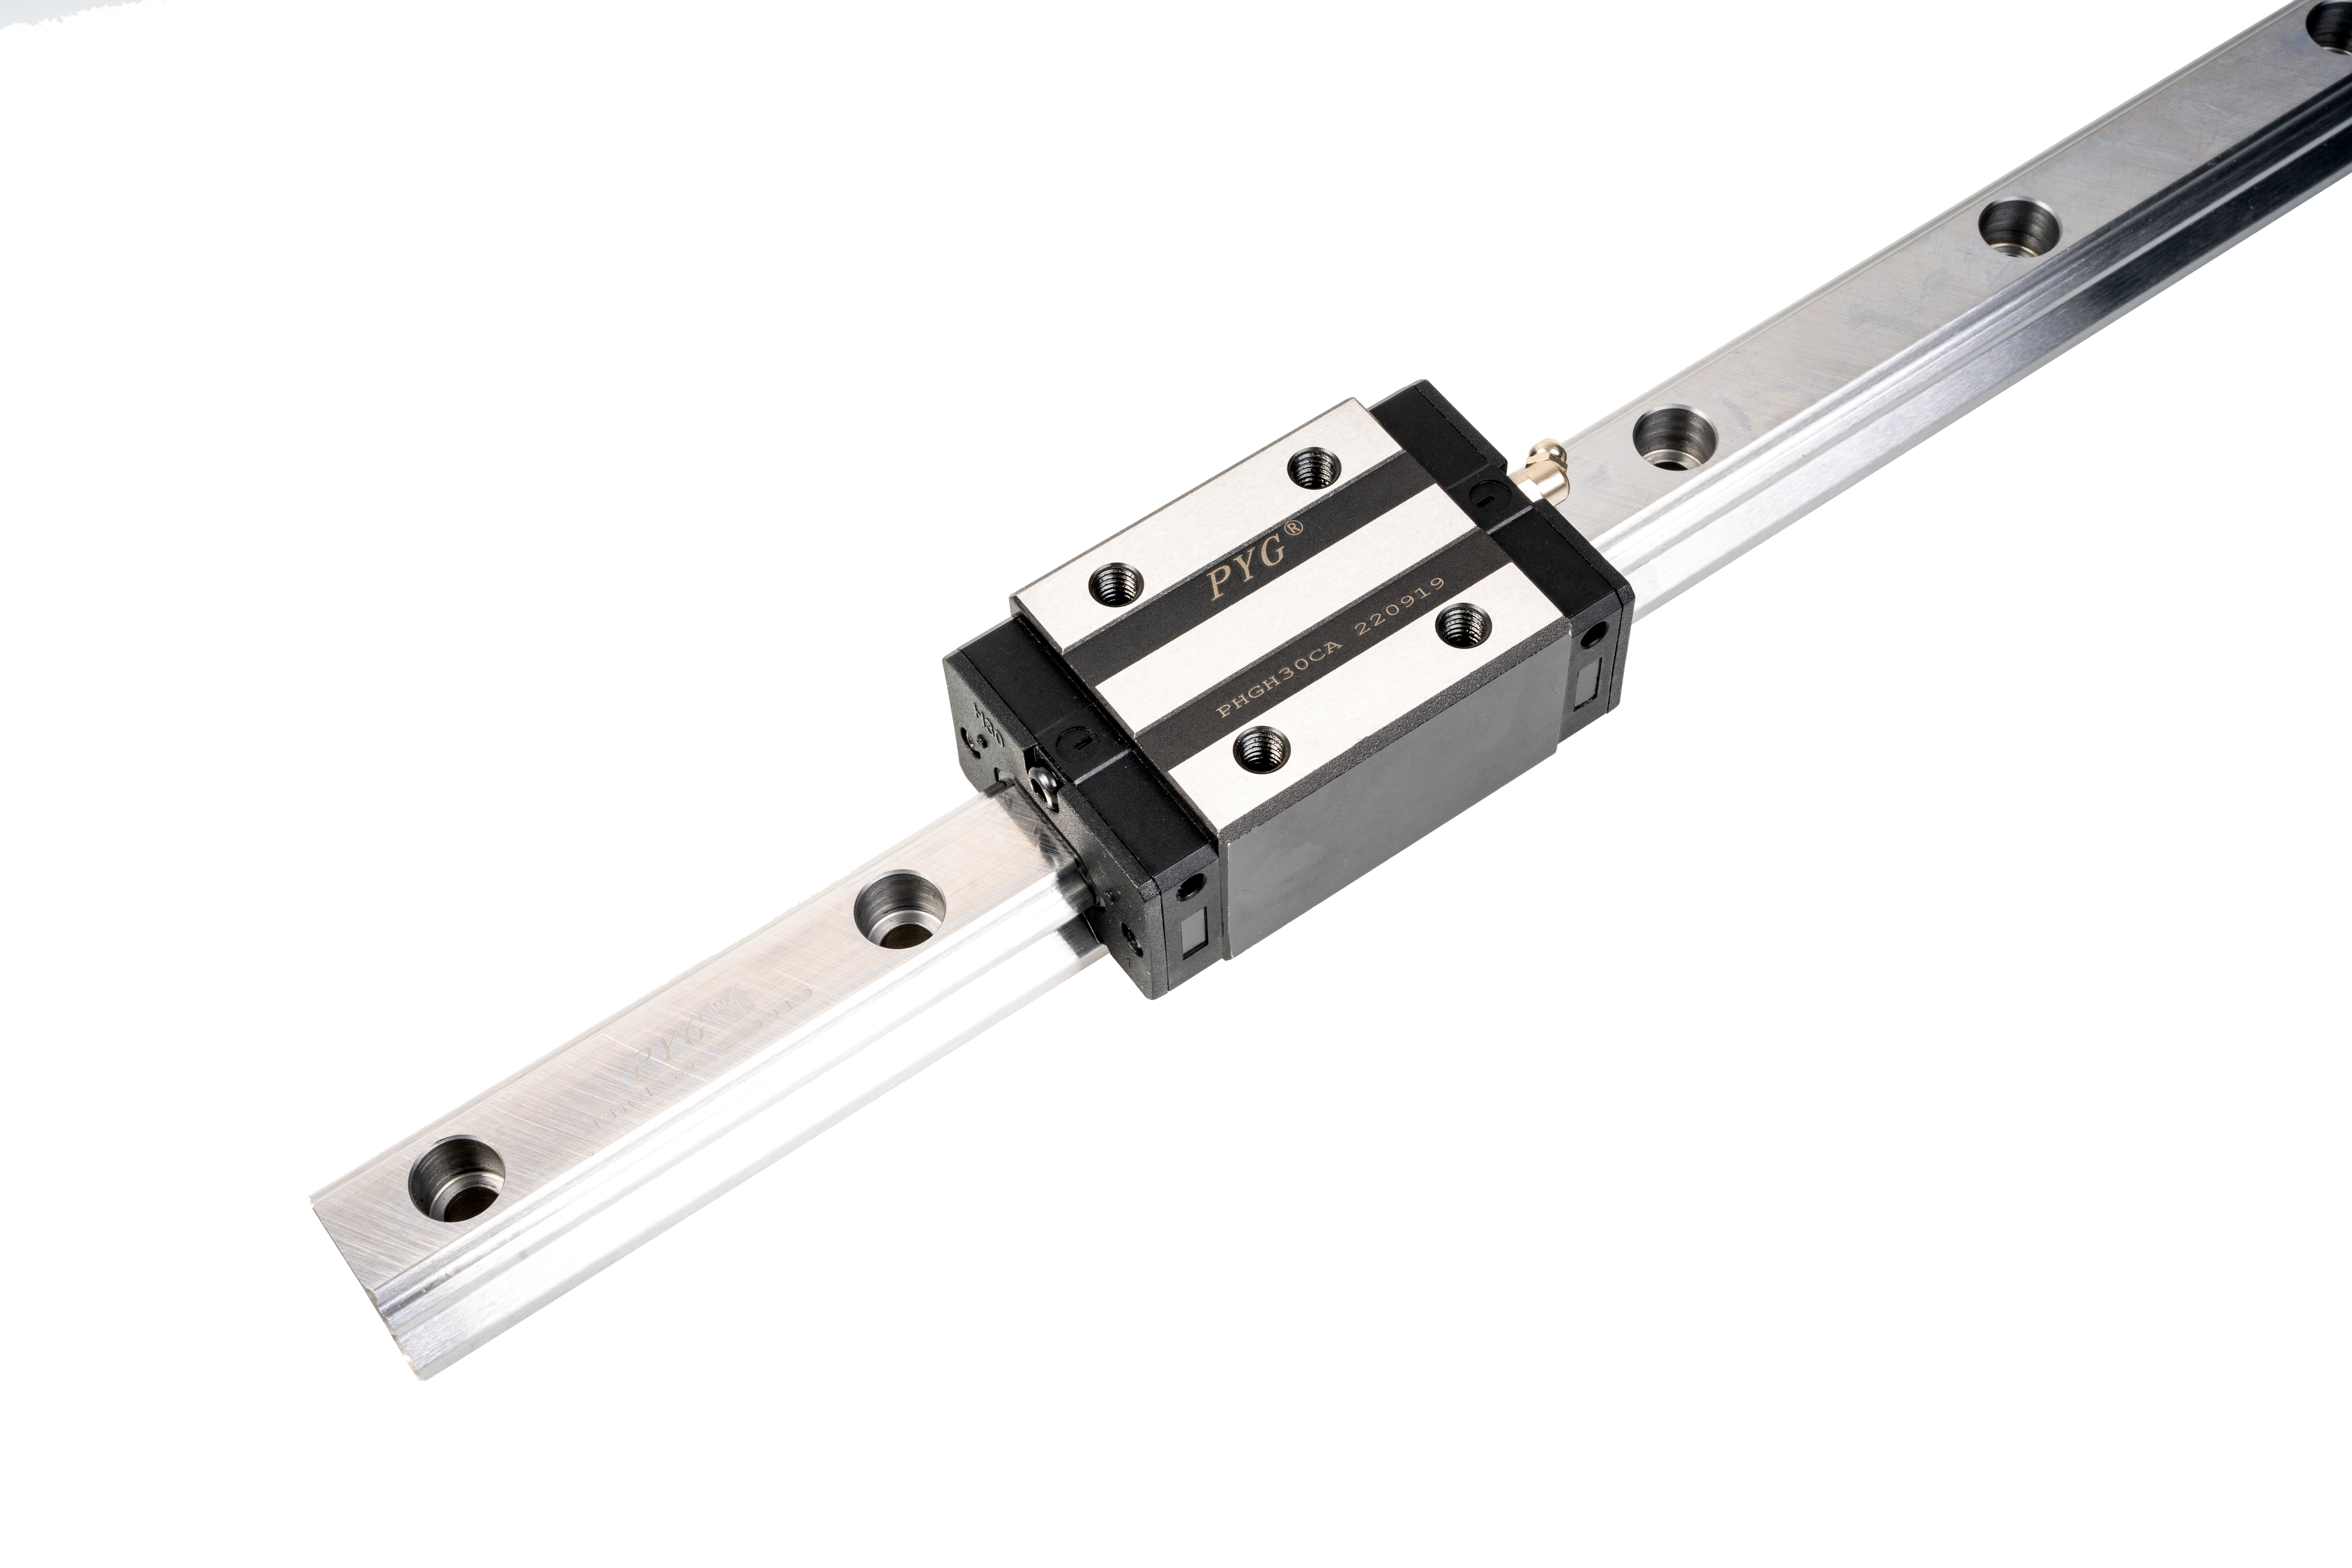 Bosch Rexroth adds new BSCL Ball Rail to linear-guide portfolio